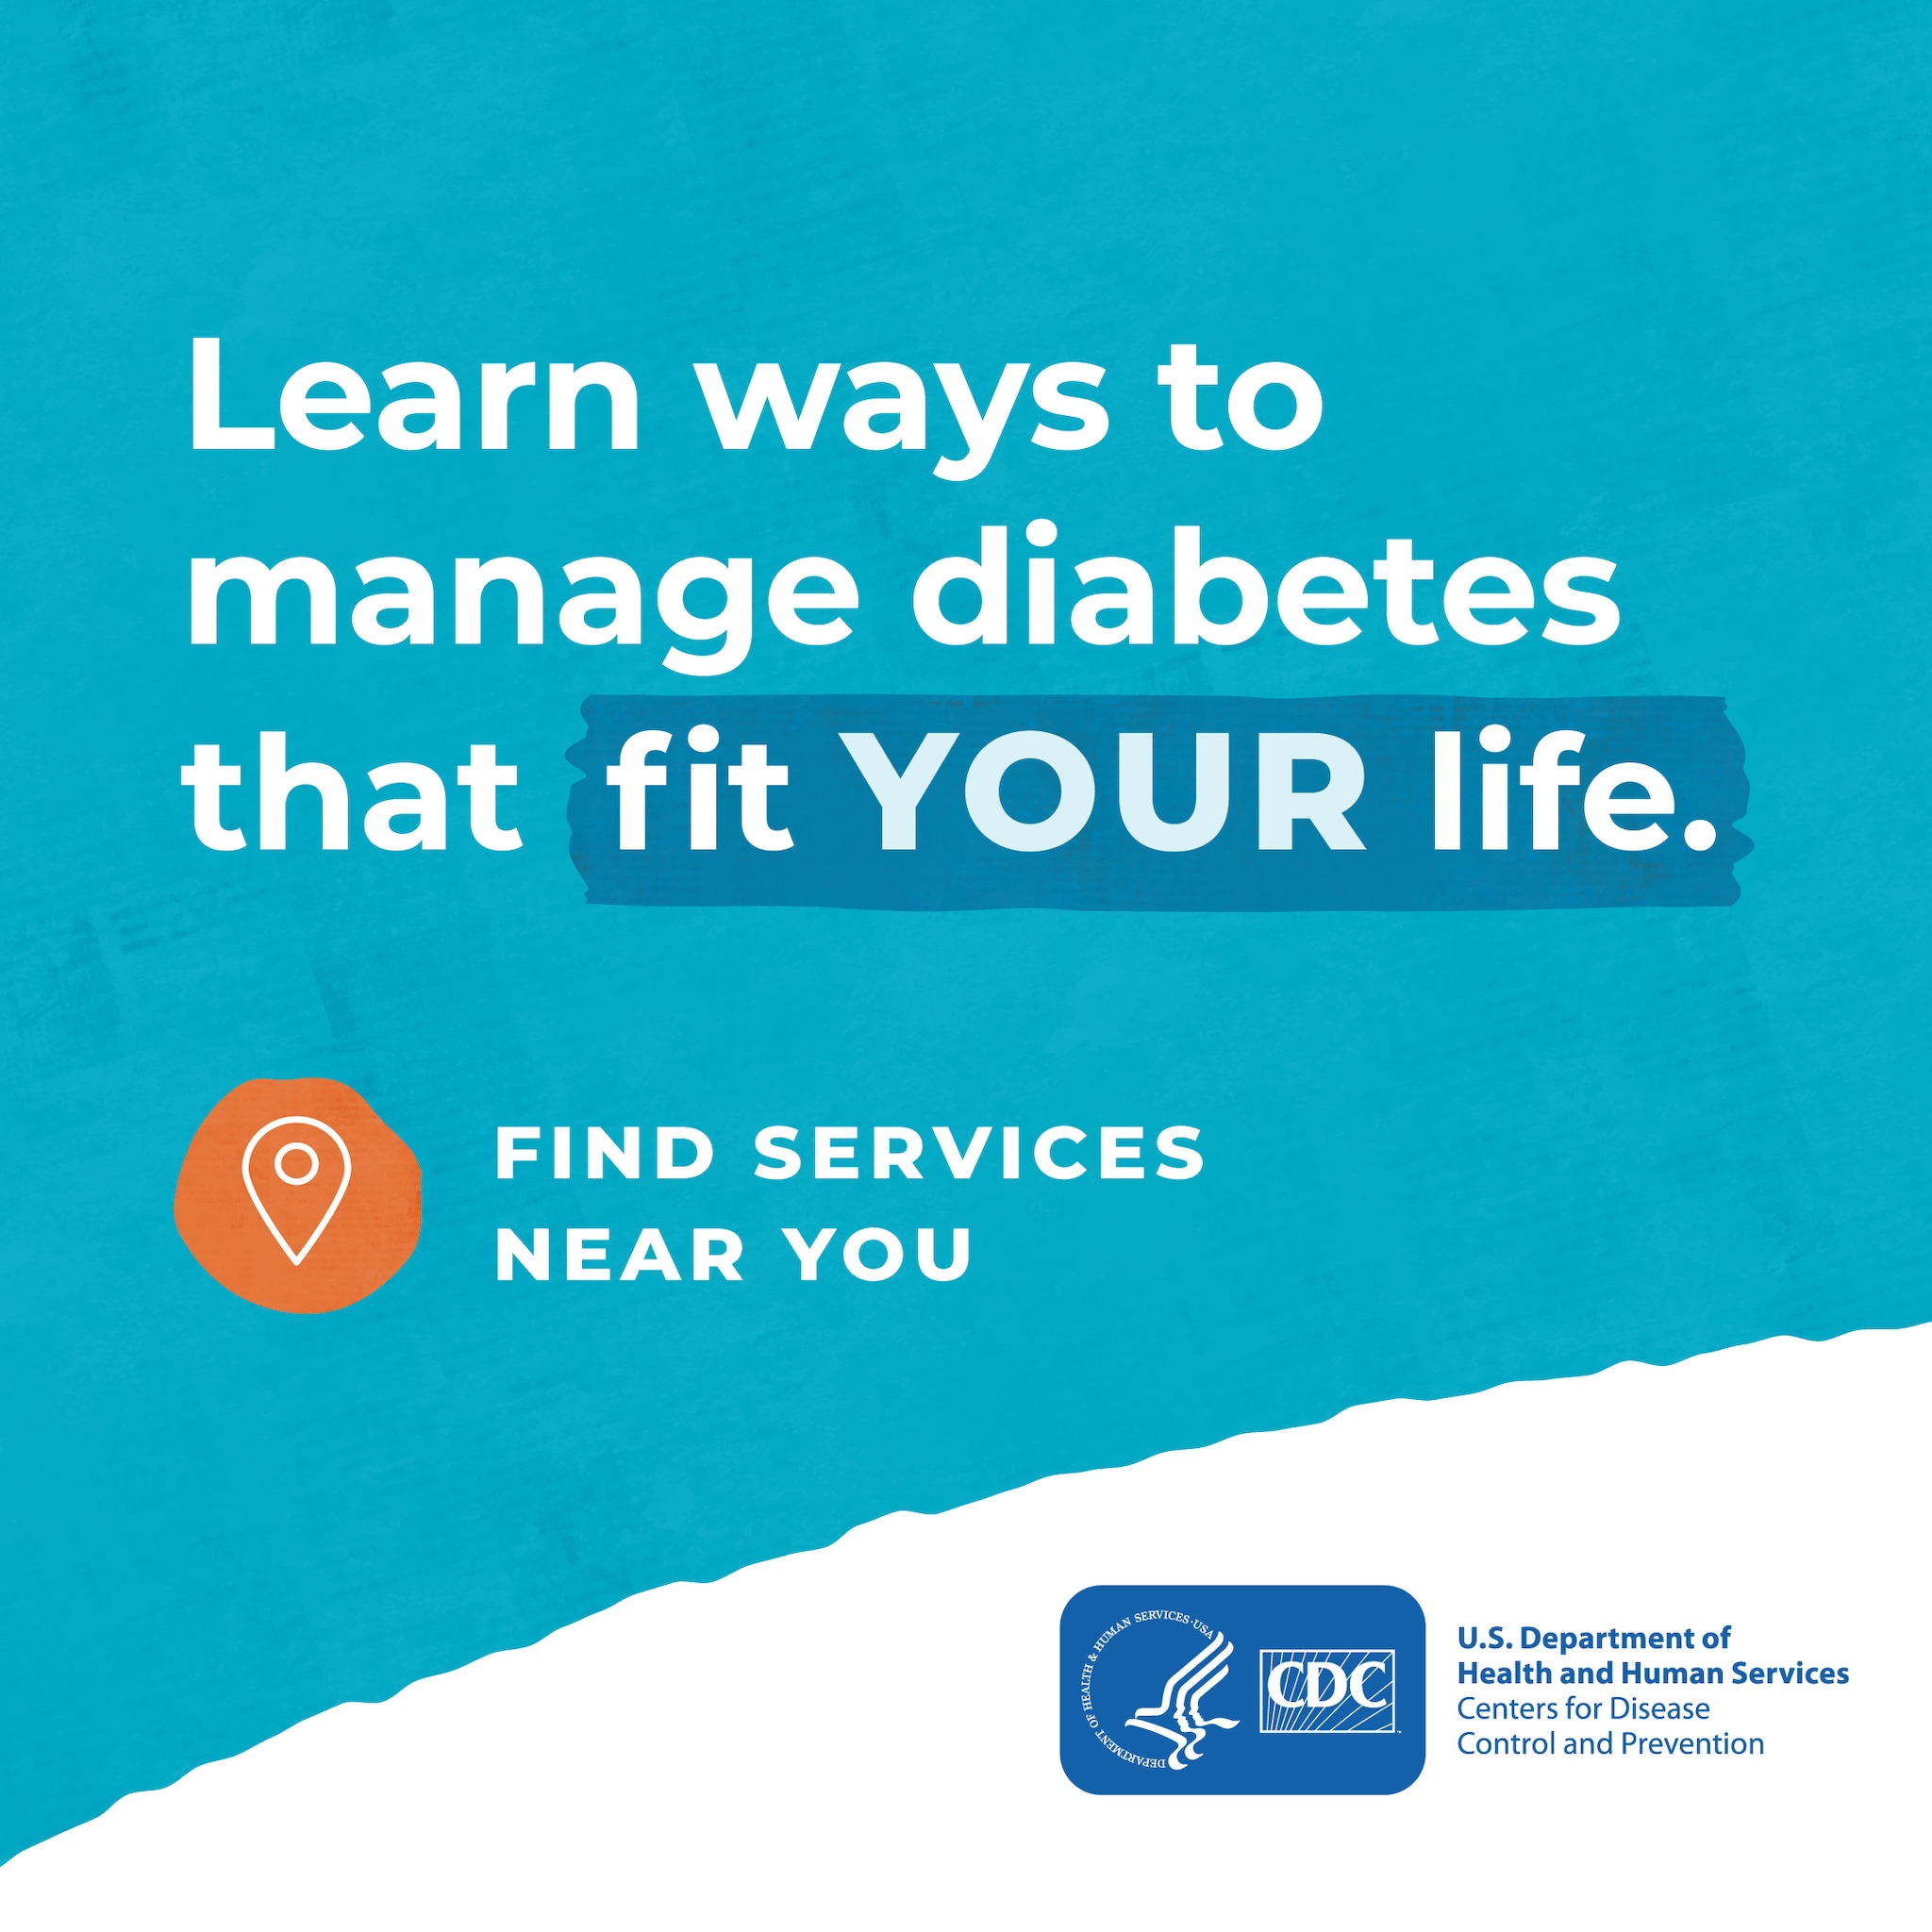 Learn ways to manage diabetes that fit your life. Find services near you. CDC logo.